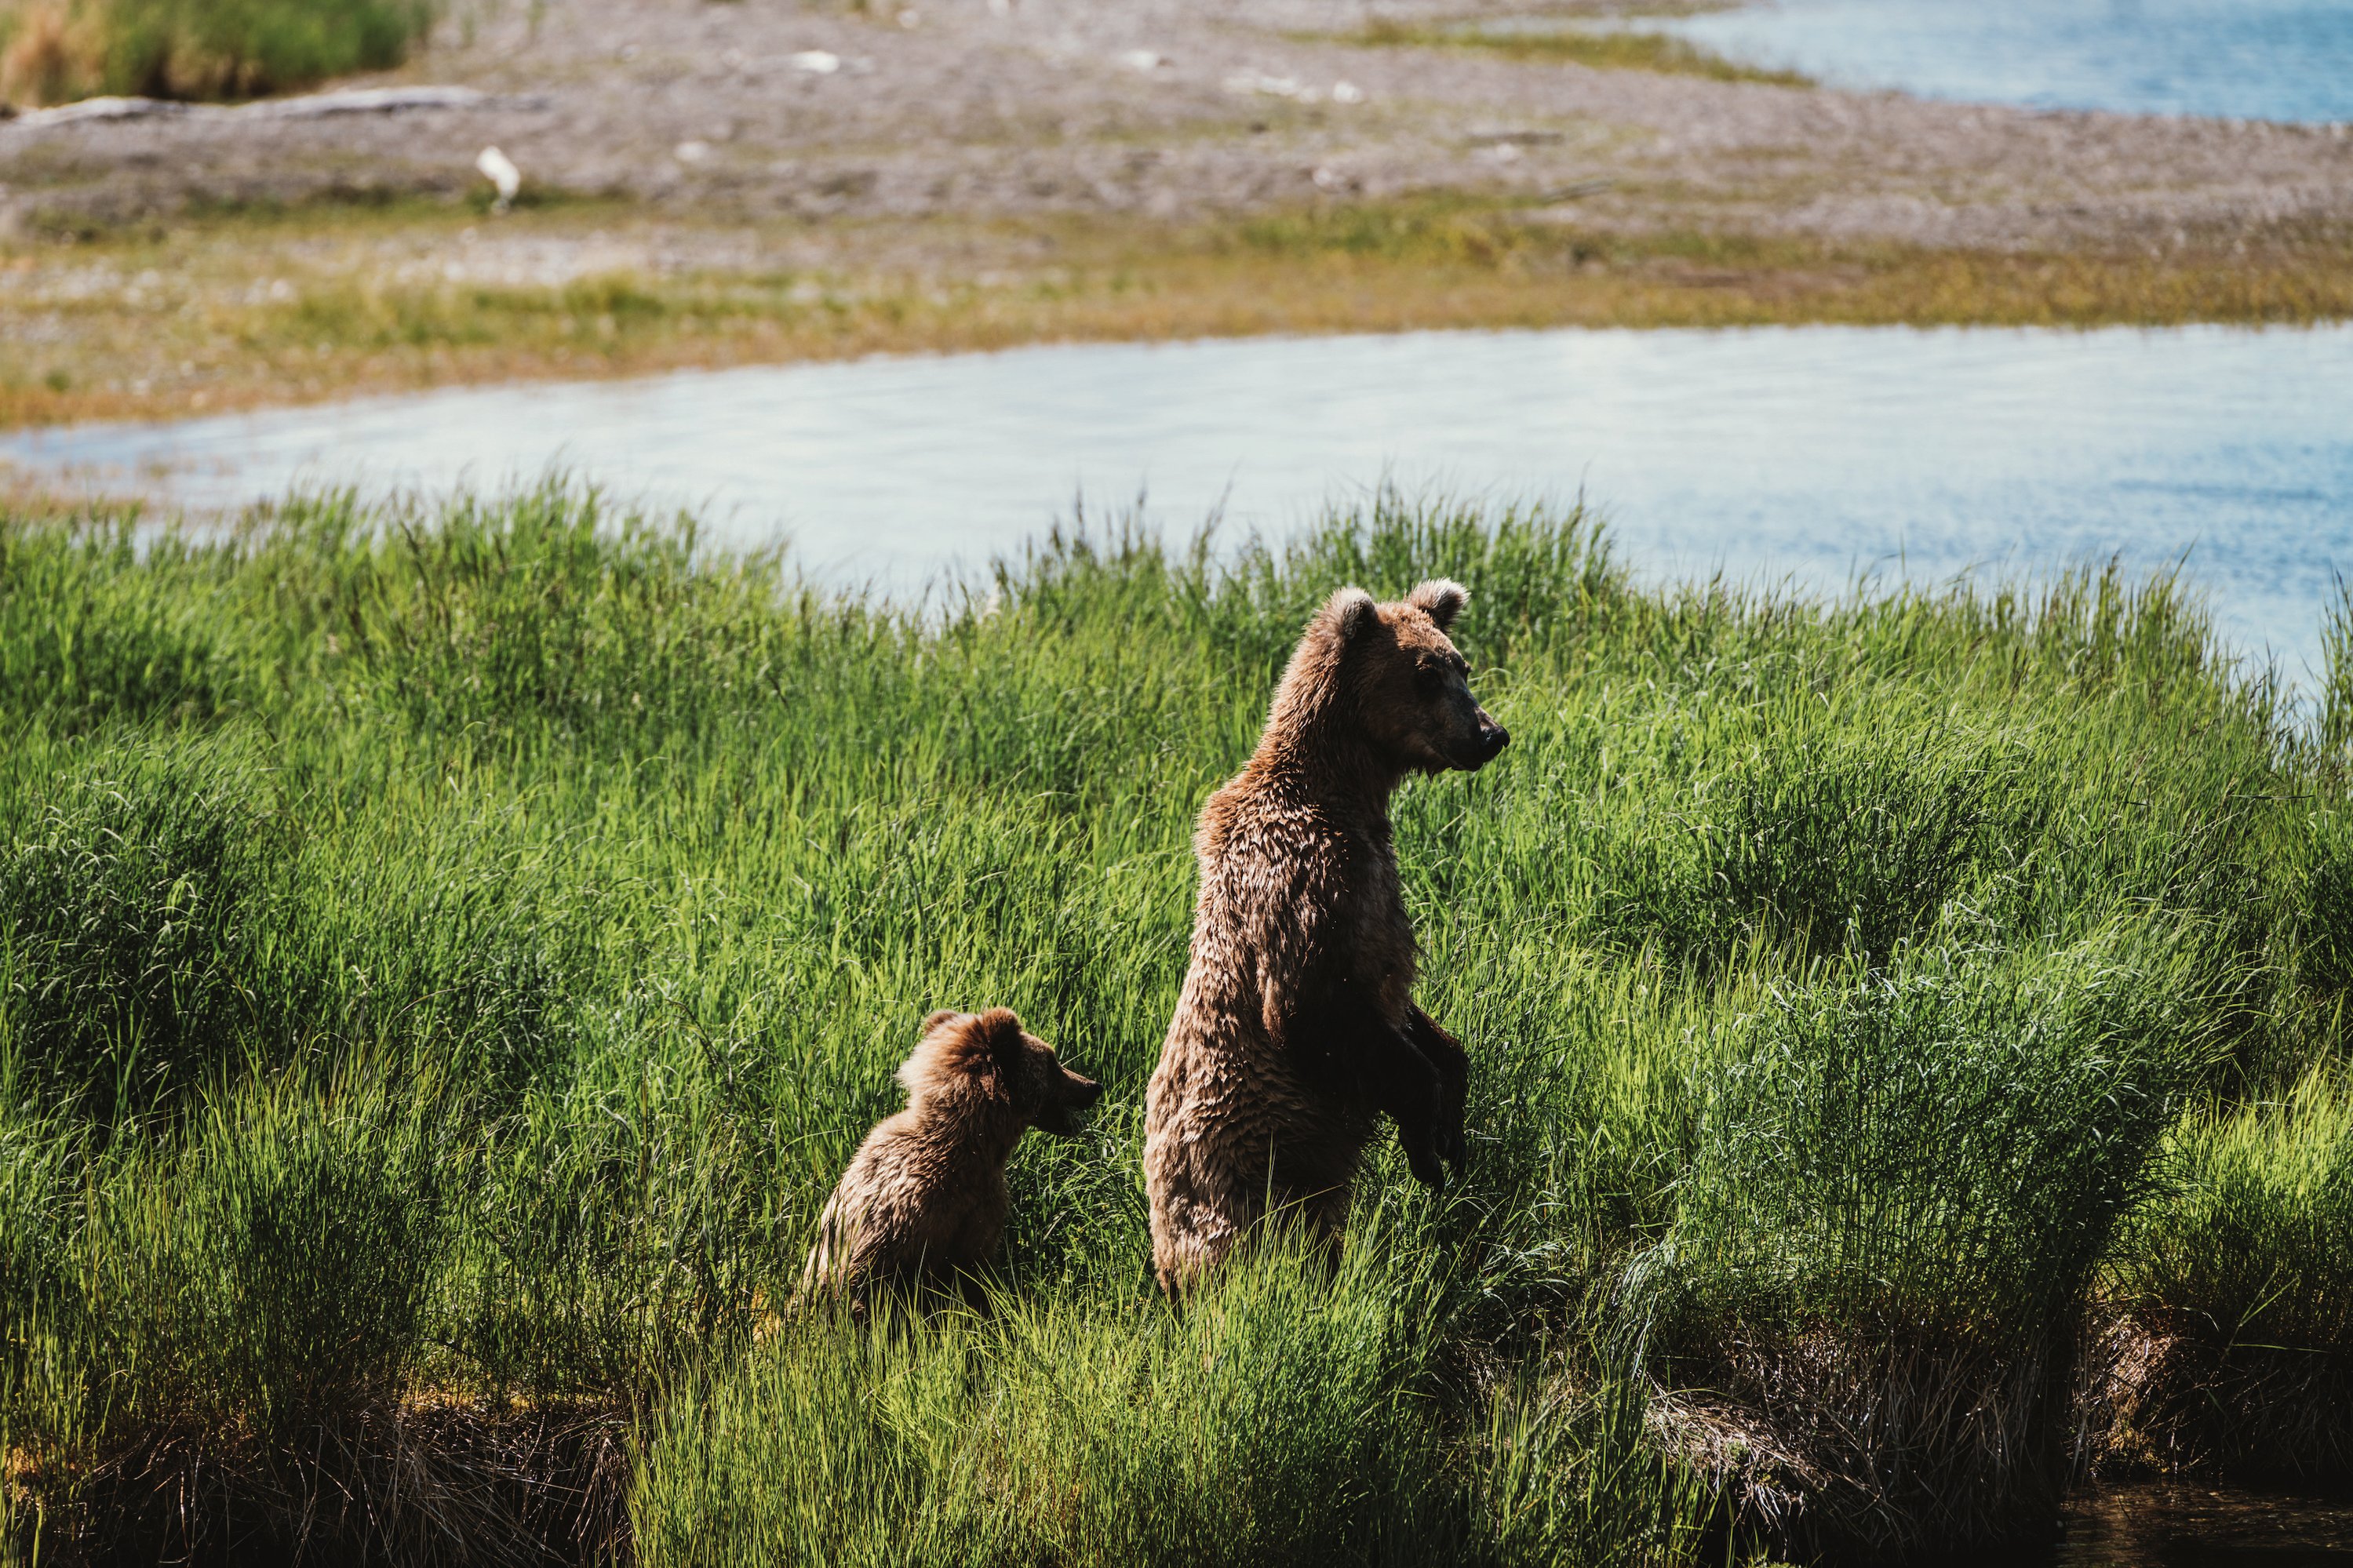 Two brown bears in the grass by a river. One stands on its hind legs and the other is behind it in the grass